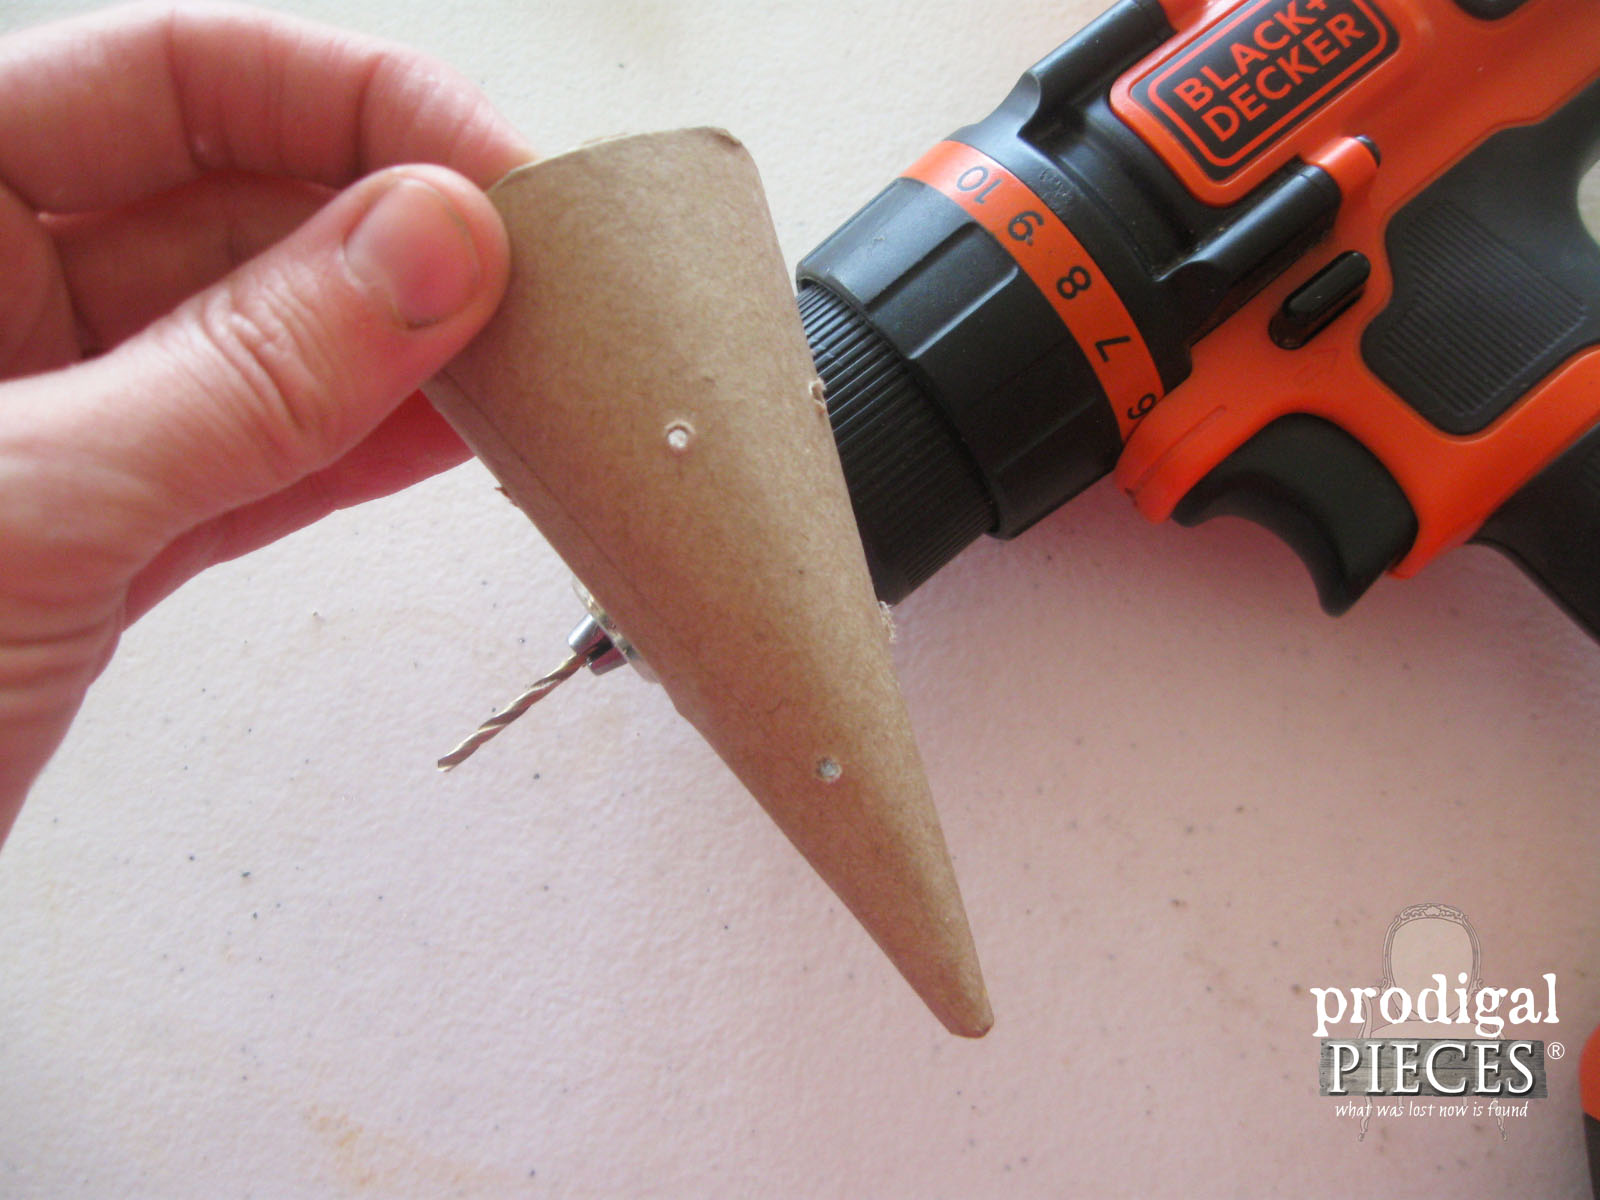 Drilling Cone for Carrot Cat Toy | Prodigal Pieces | www.prodigalpieces.com